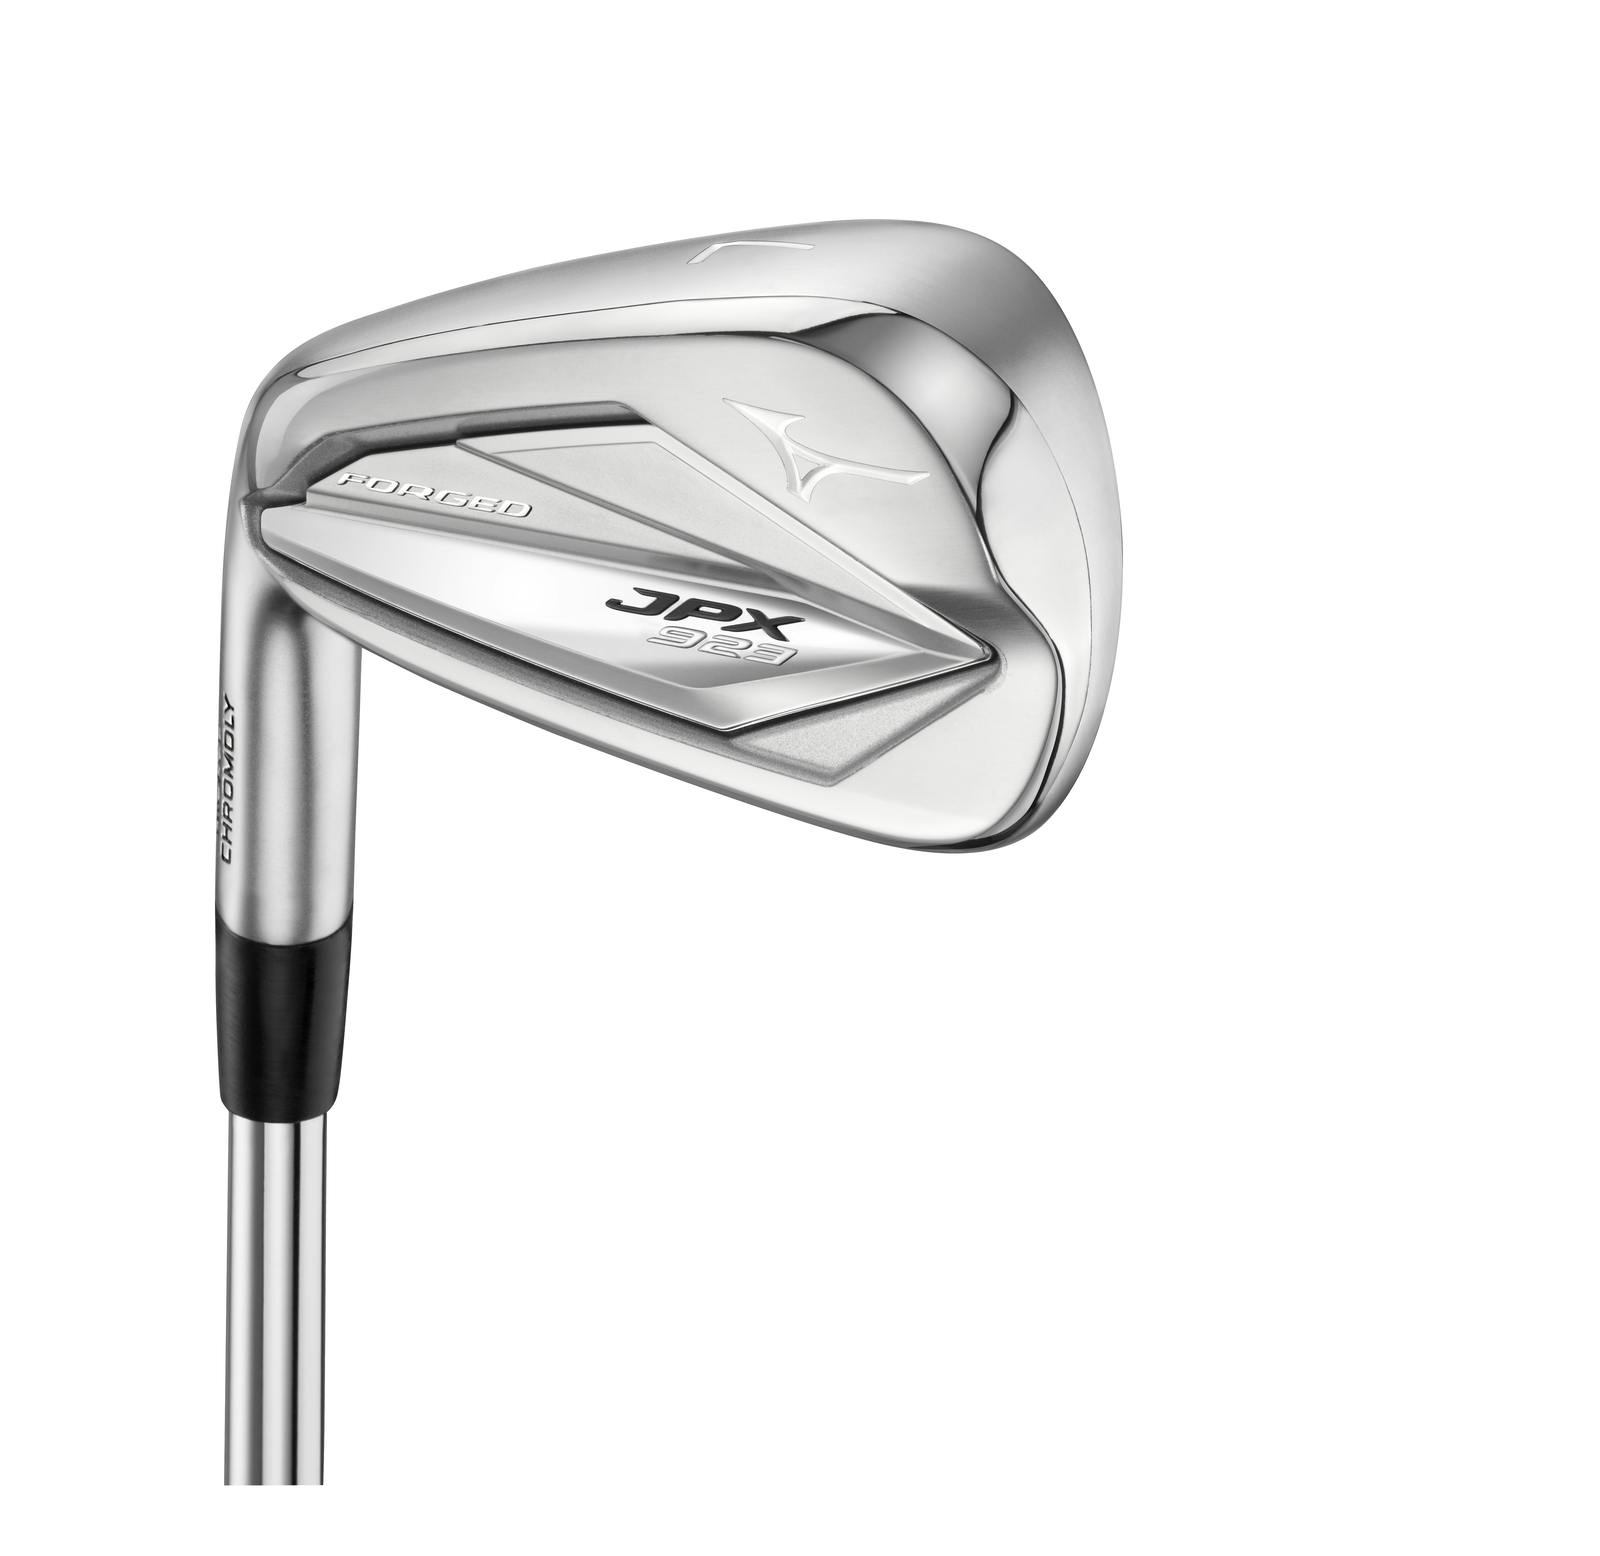 Mizuno JPX923 Forged Irons · Left handed · Steel · Regular · 5-PW,GW